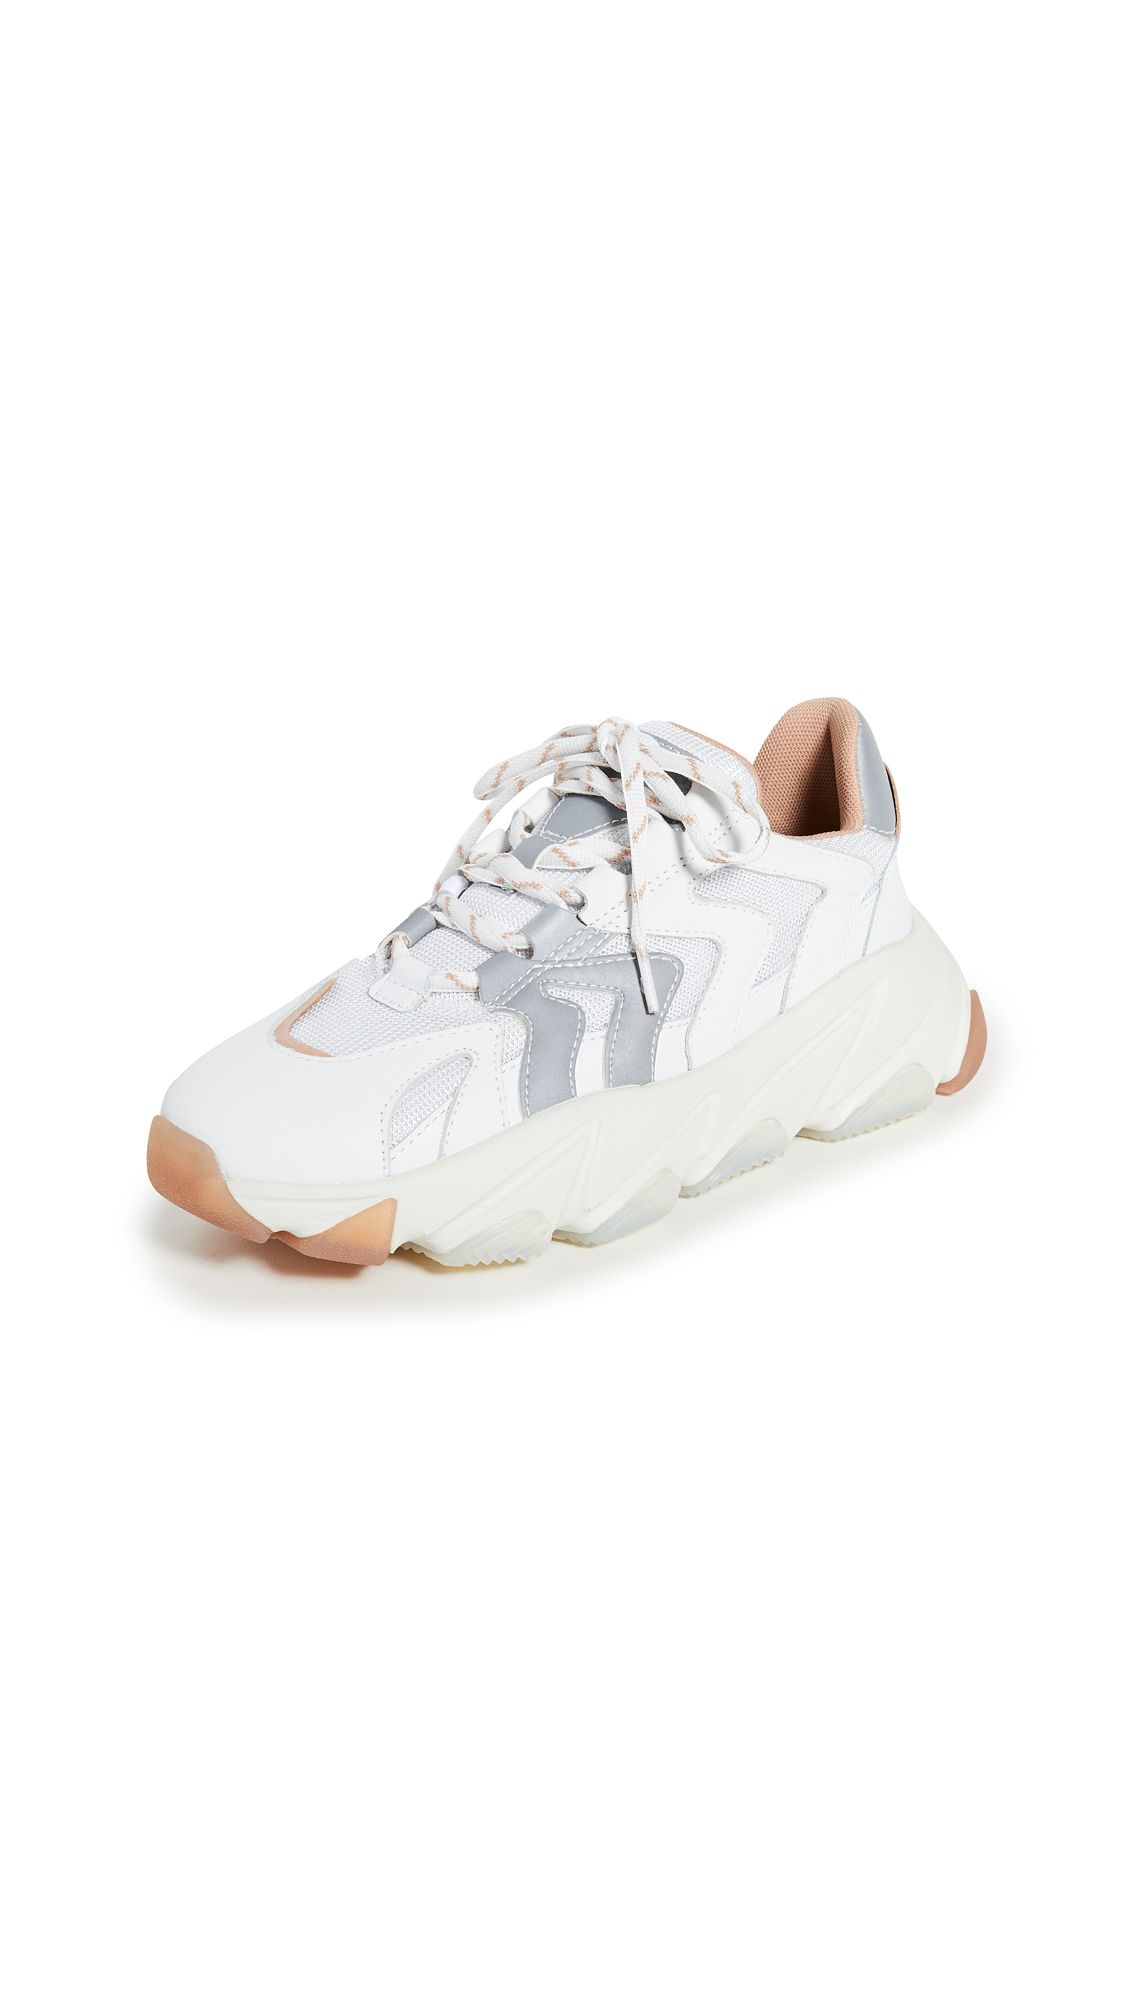 Ash Extreme Sneakers | Shopbop